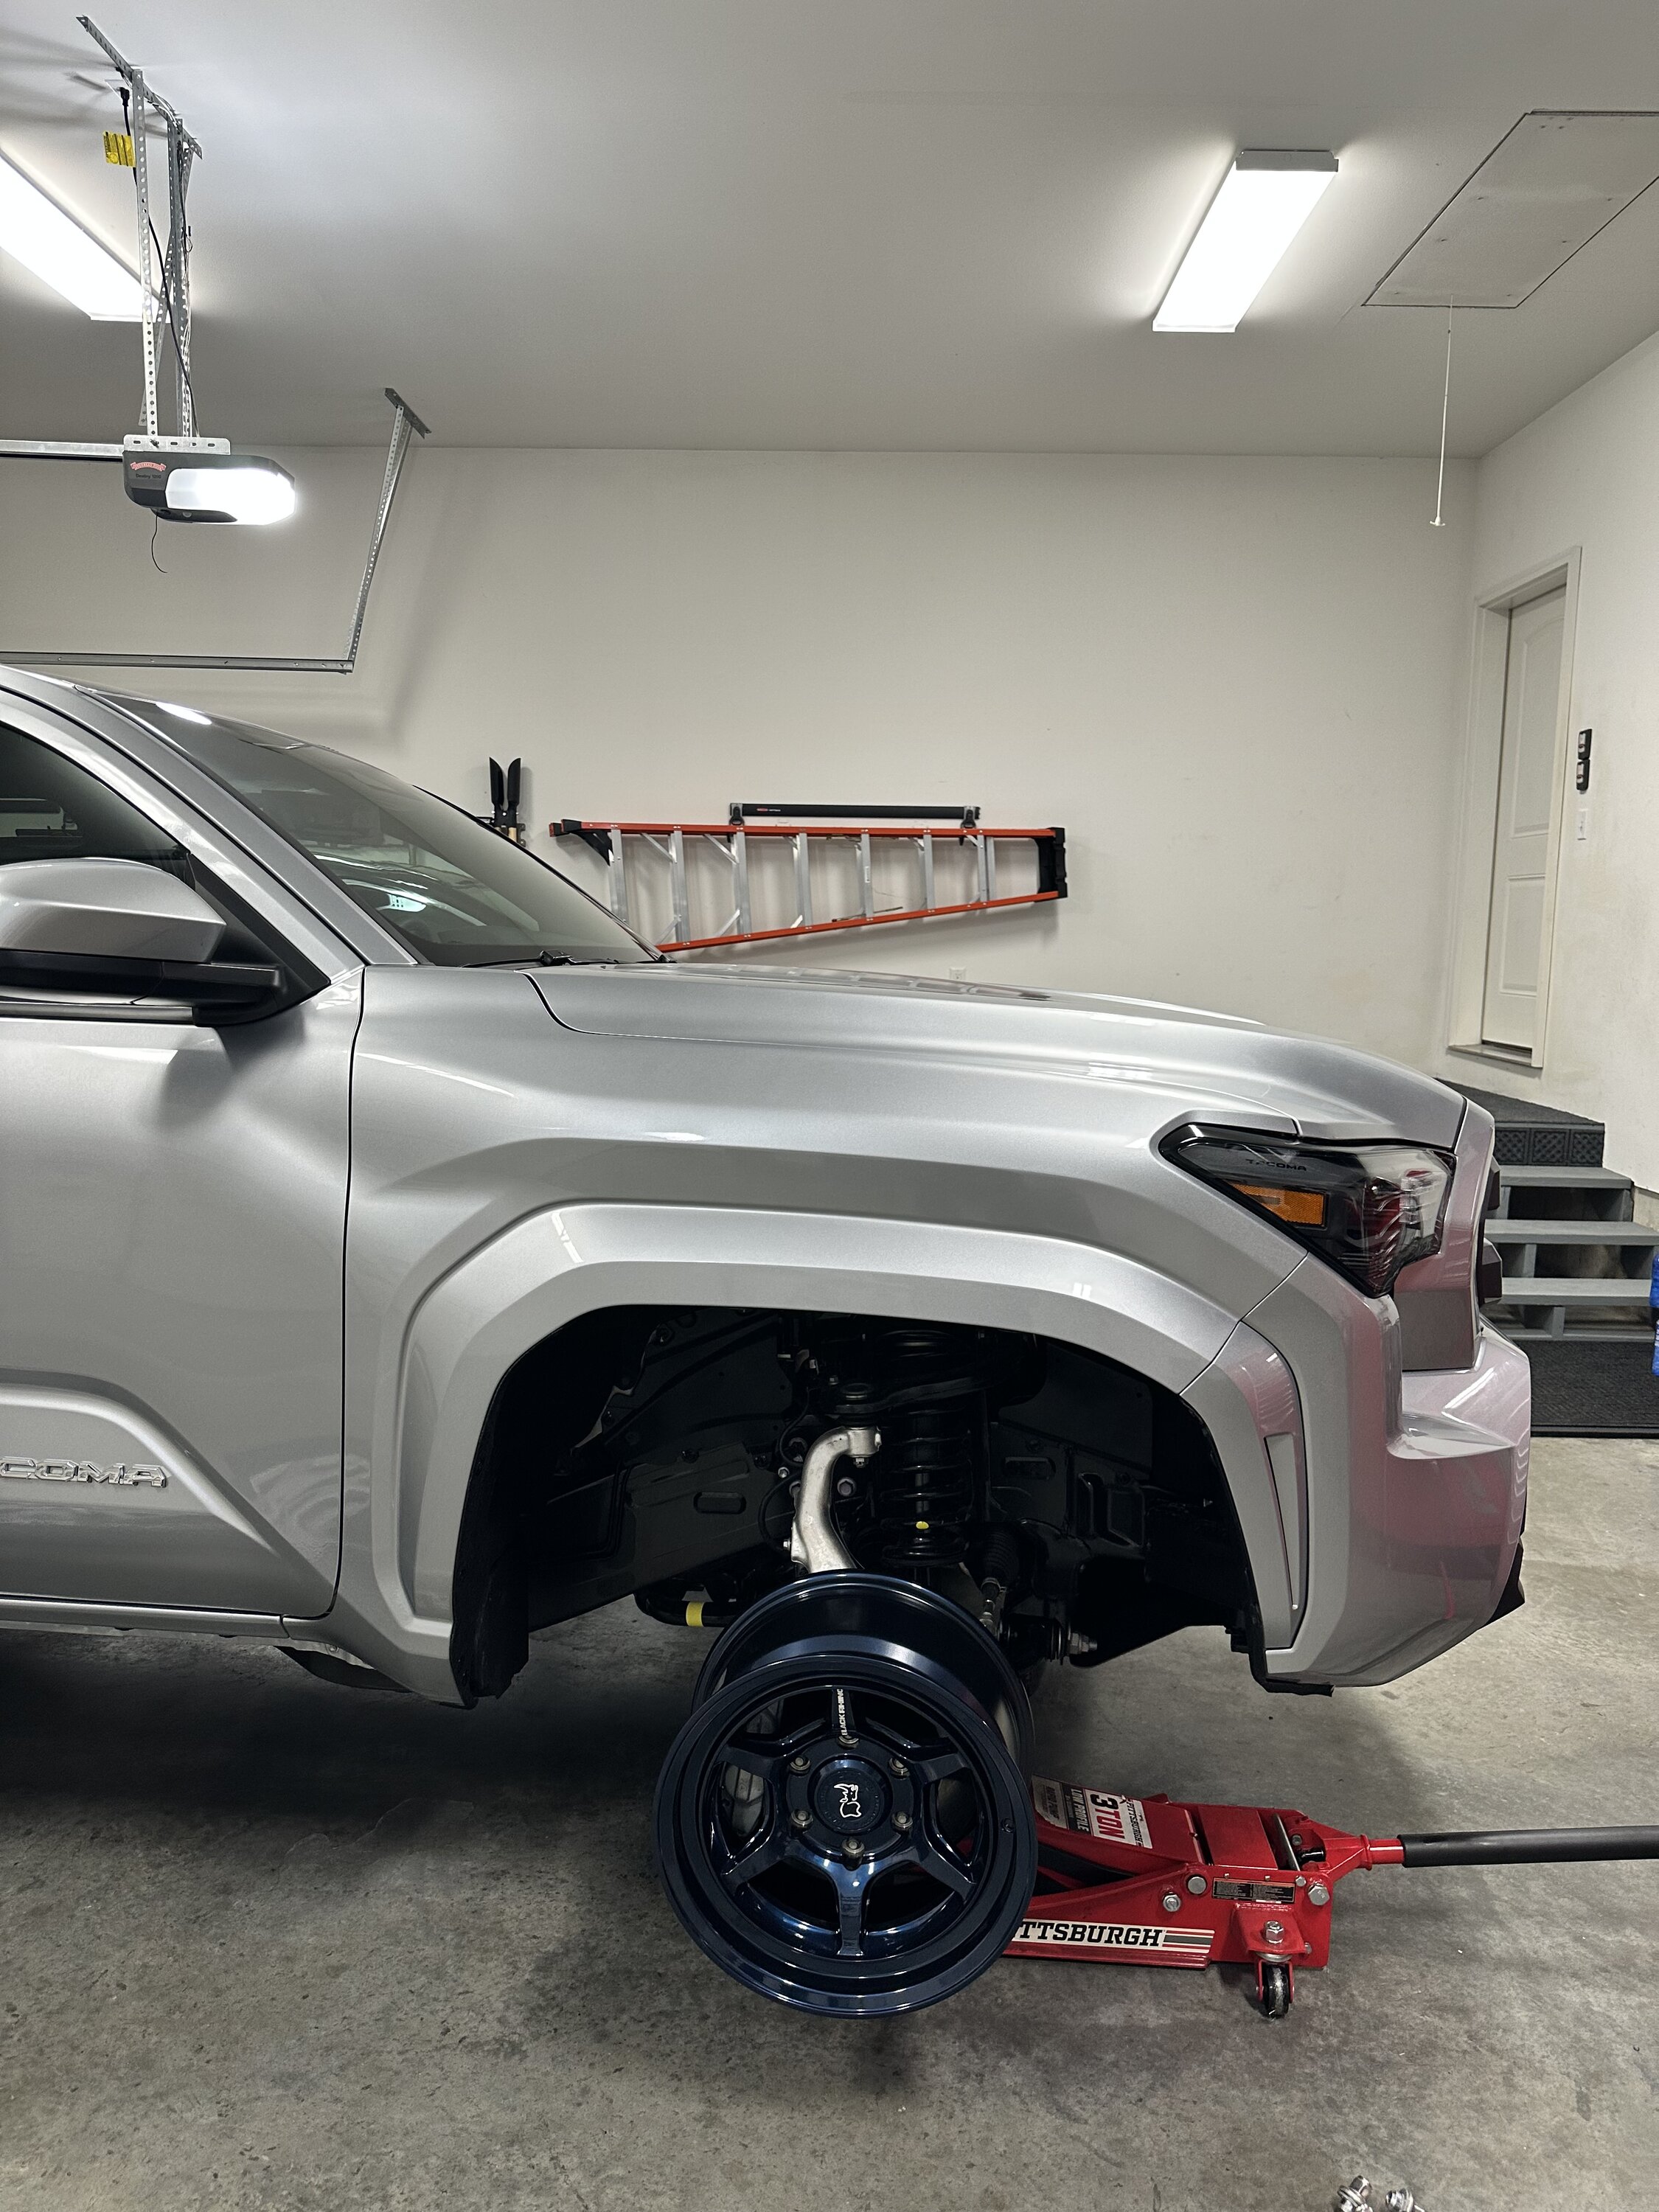 2024 Tacoma Verification that 16" inch wheels  do fit on 4th gen Tacoma IMG_5940